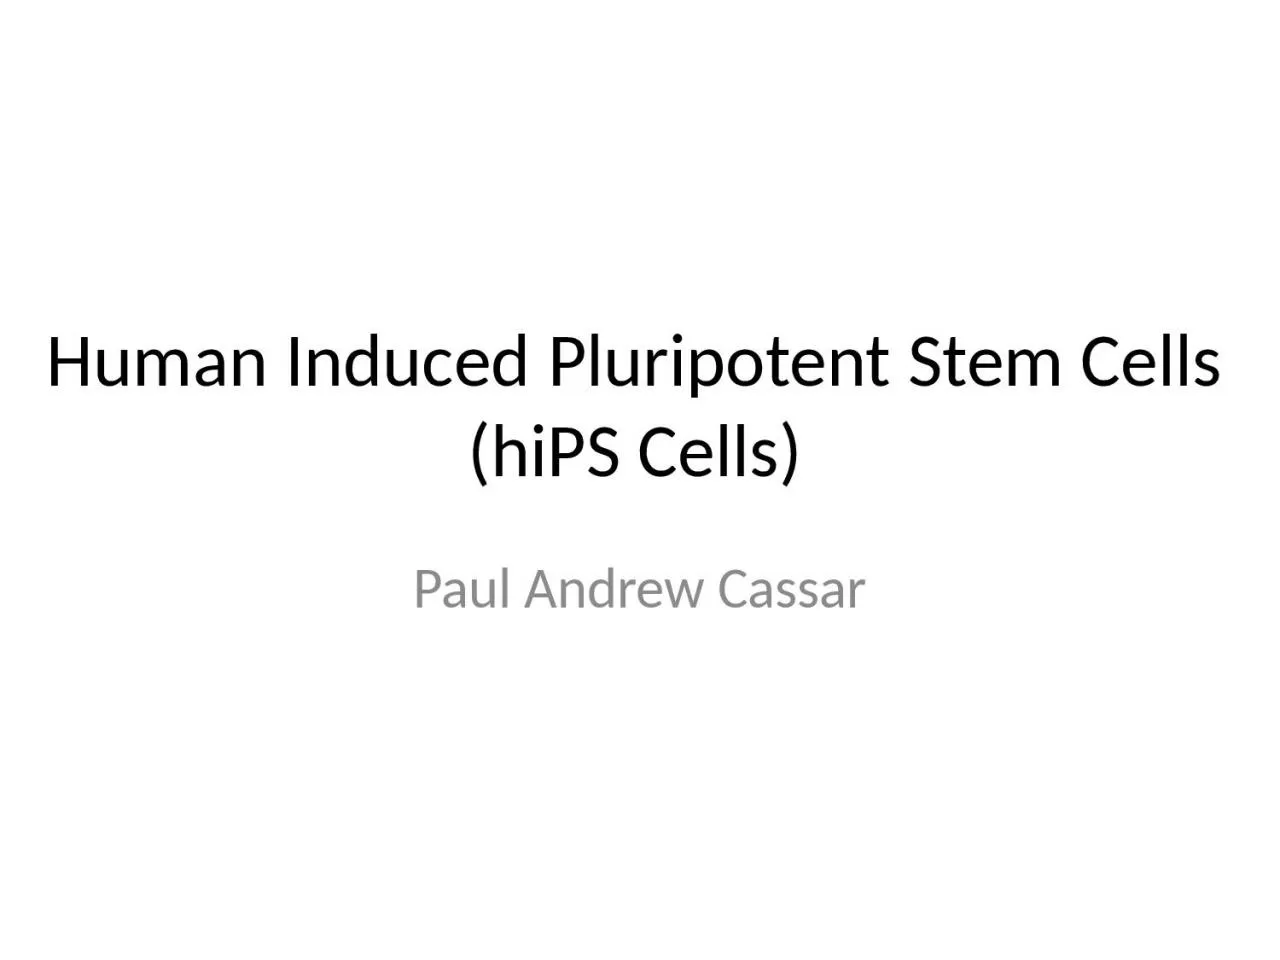 Human Induced Pluripotent Stem Cells